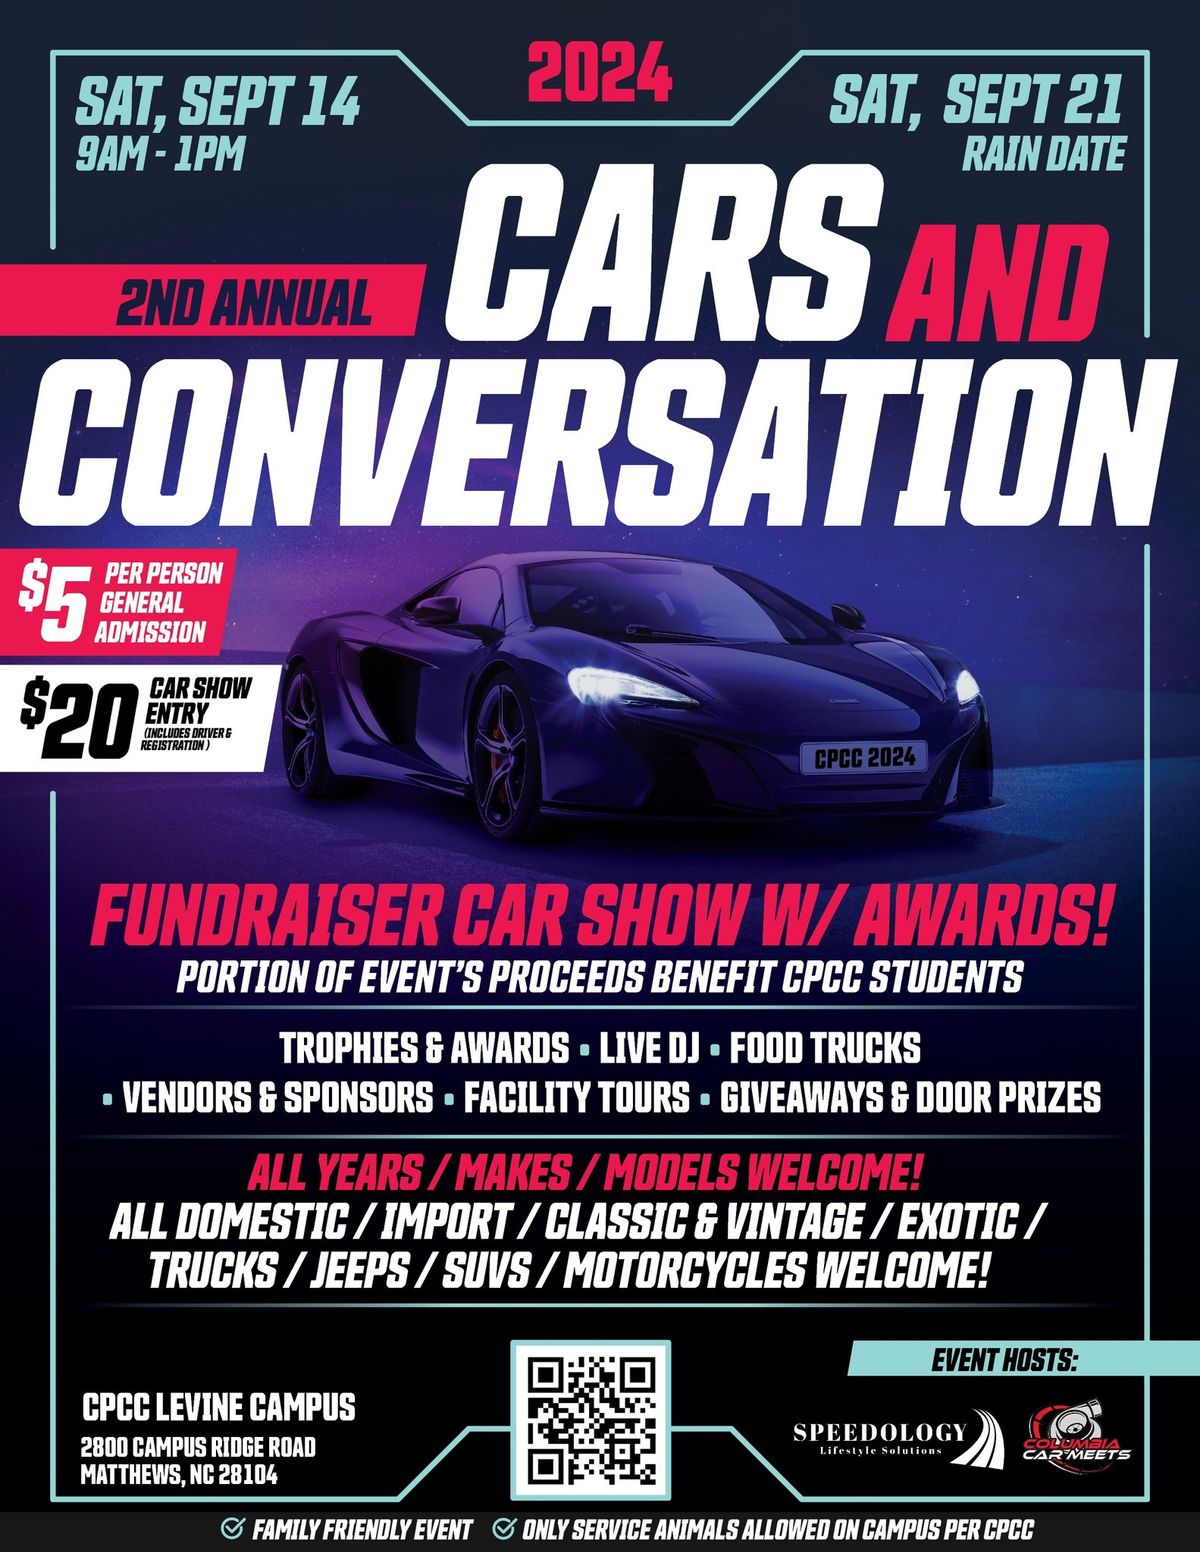 2nd Annual Cars and Conversation Fundraiser Show @ CPCC Levine Campus 